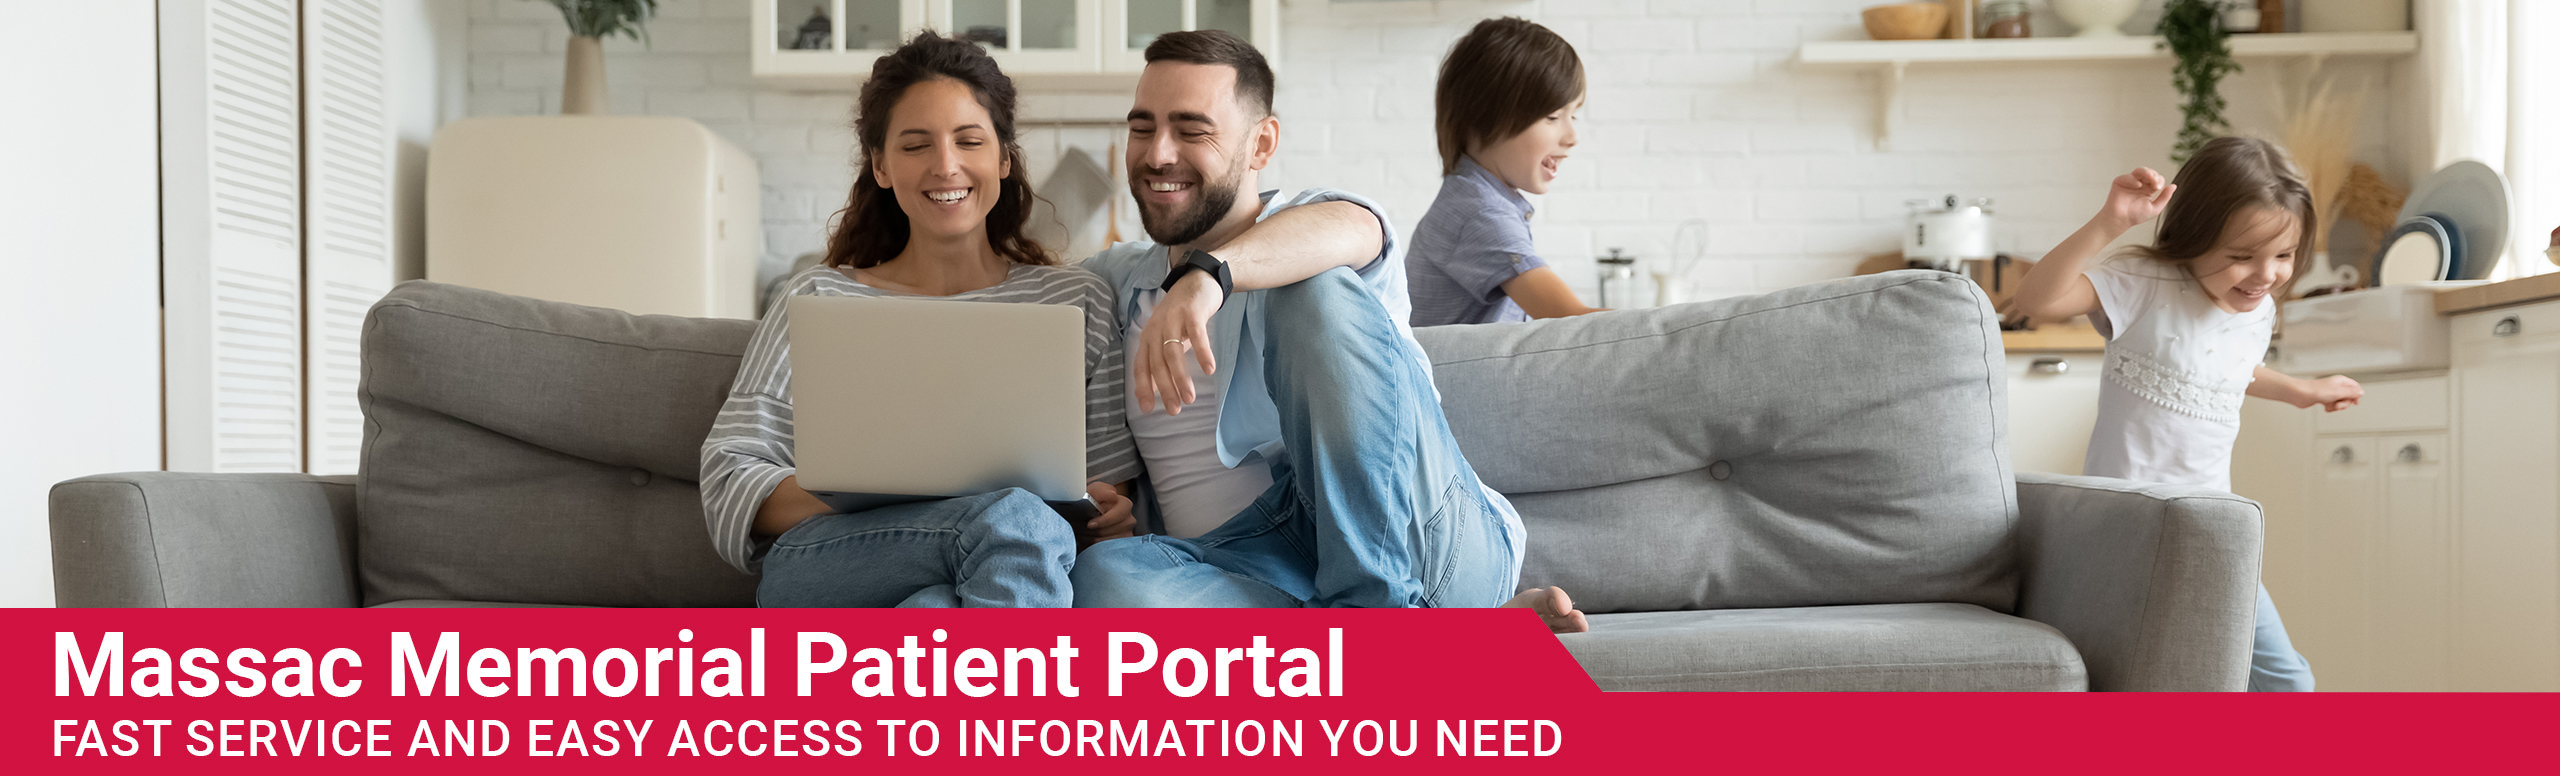 Massac Memorial  Patient Portal
FAST SERVICES AND EASY ACESS TO INFORMATION YOU NEED